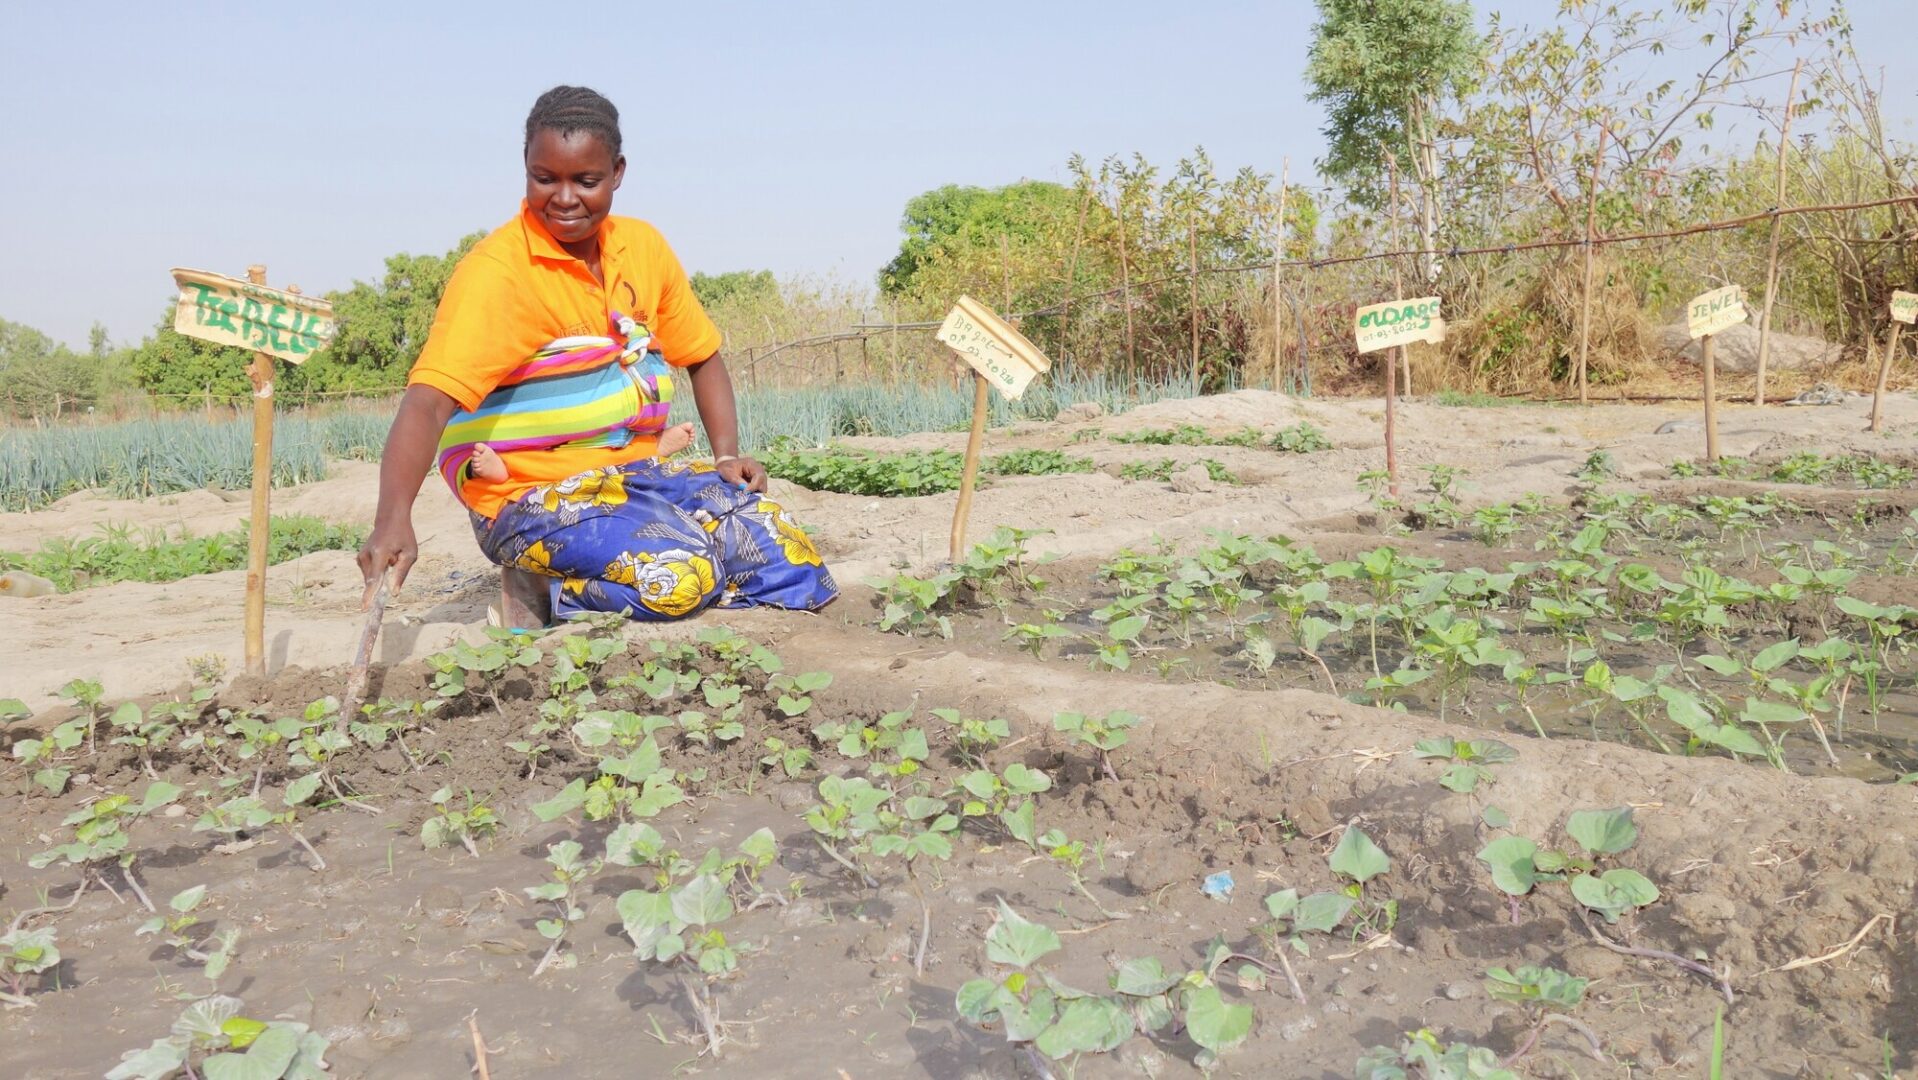 A Burkinabe woman kneels while tending to rows of plants.